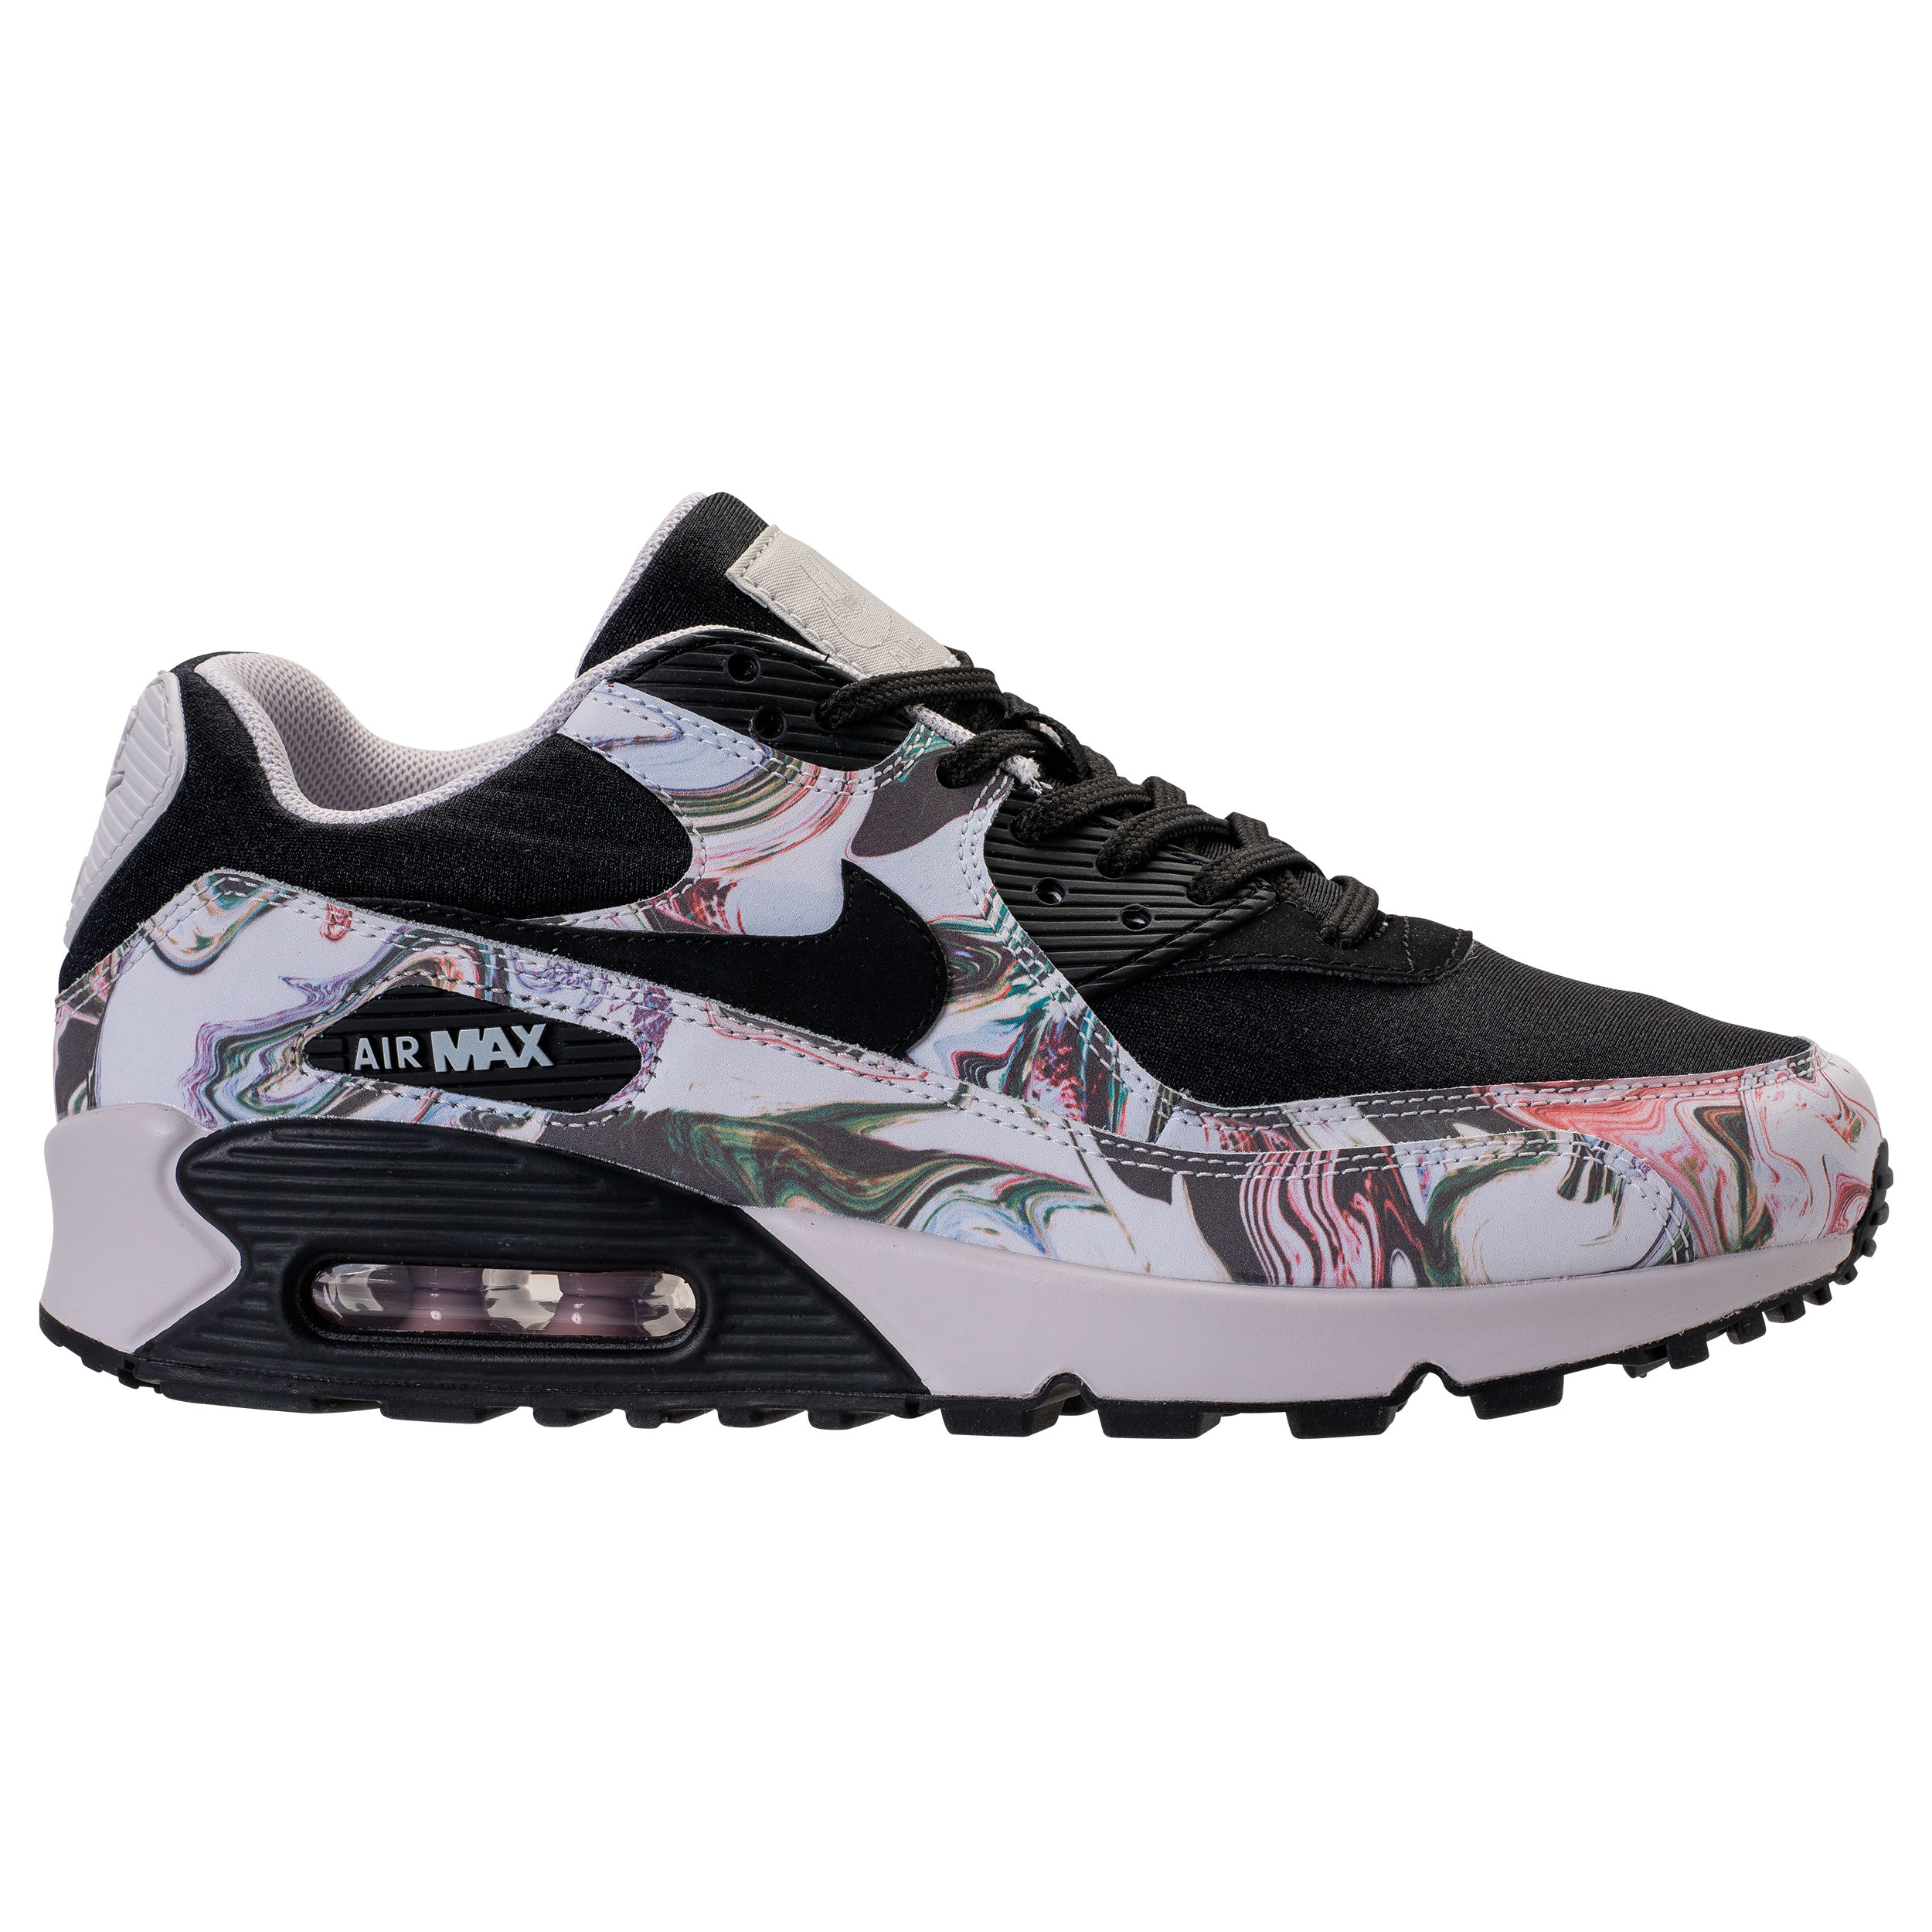 nike air max 90 marble 4-20 1 - WearTesters